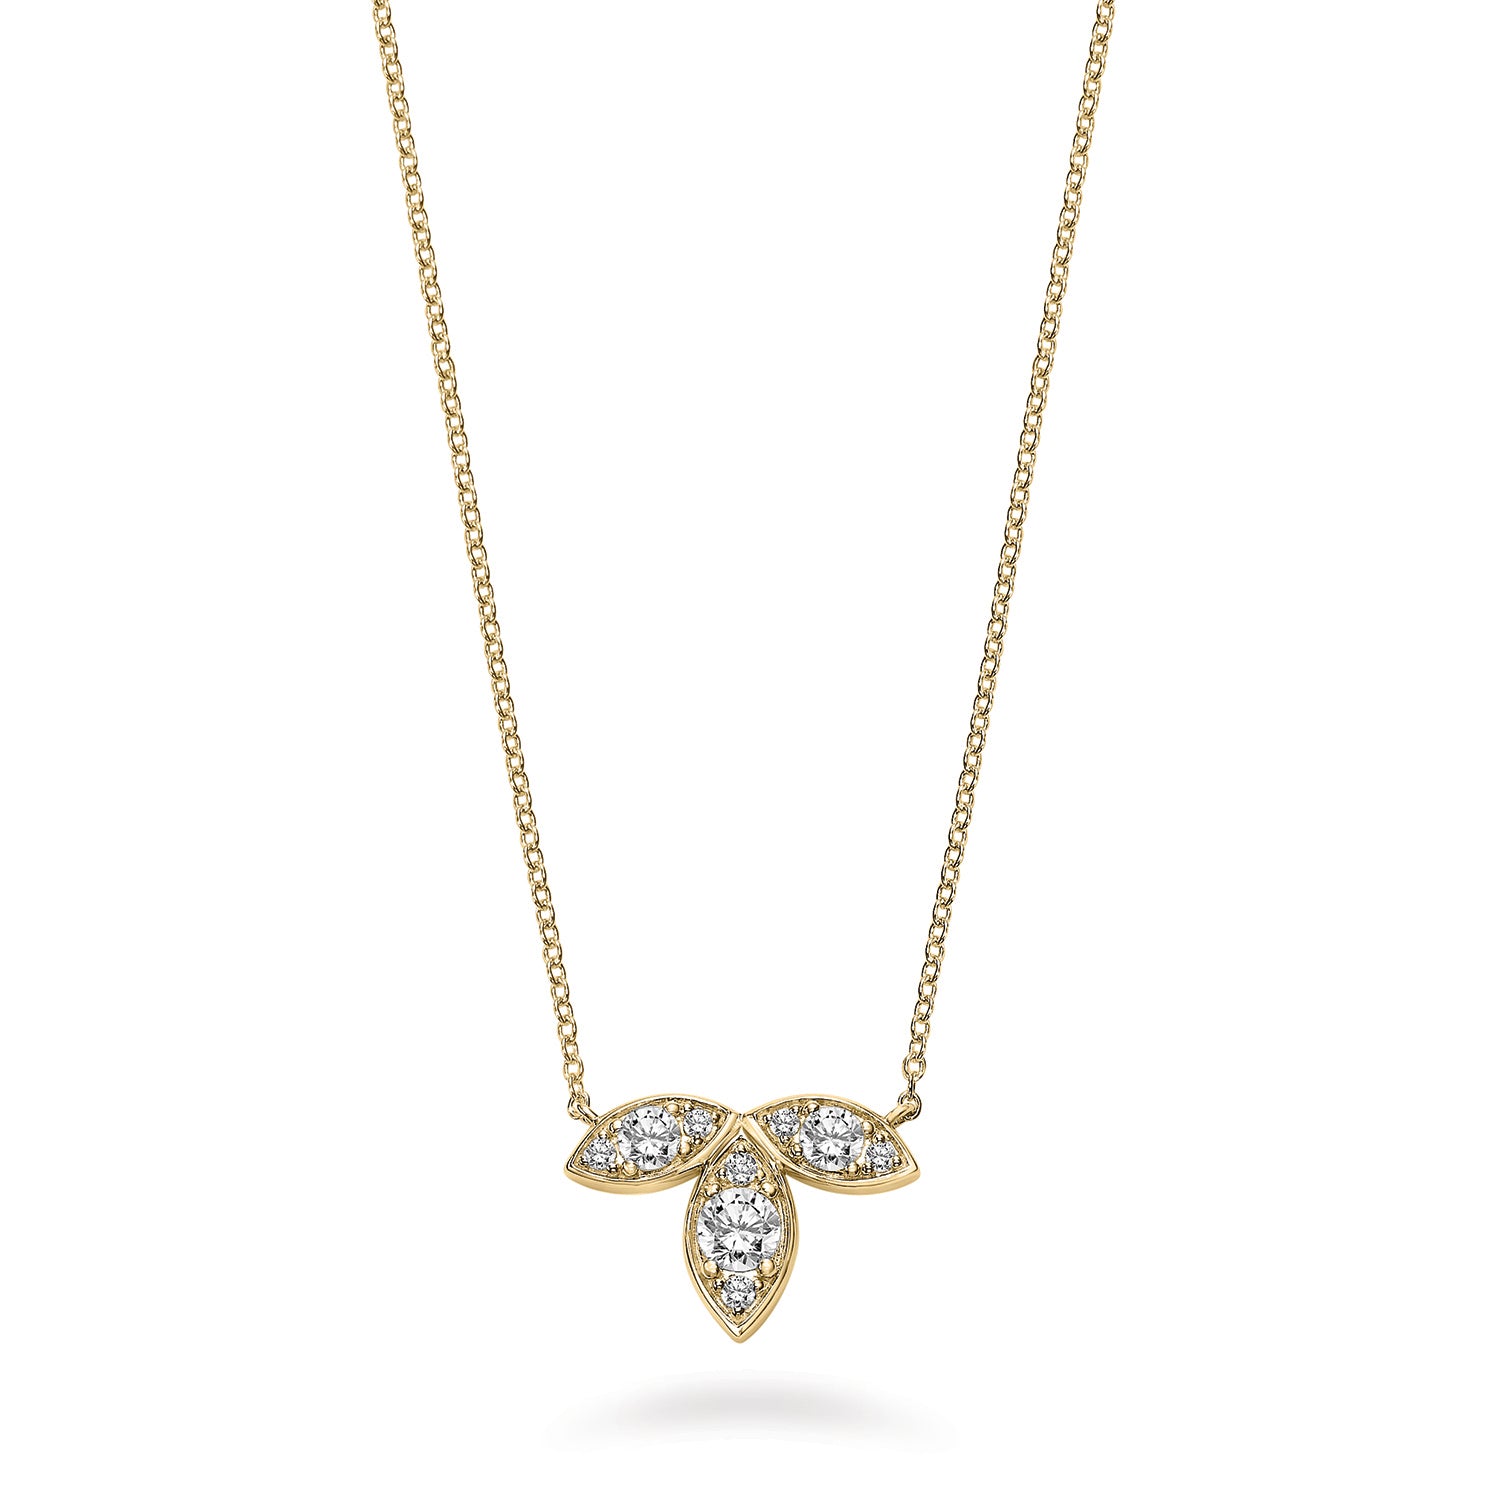 Alternating Petal Moon Flower Collection Diamond Necklace - Love Earth Jewelry 14K Yellow Gold / 1 1/4